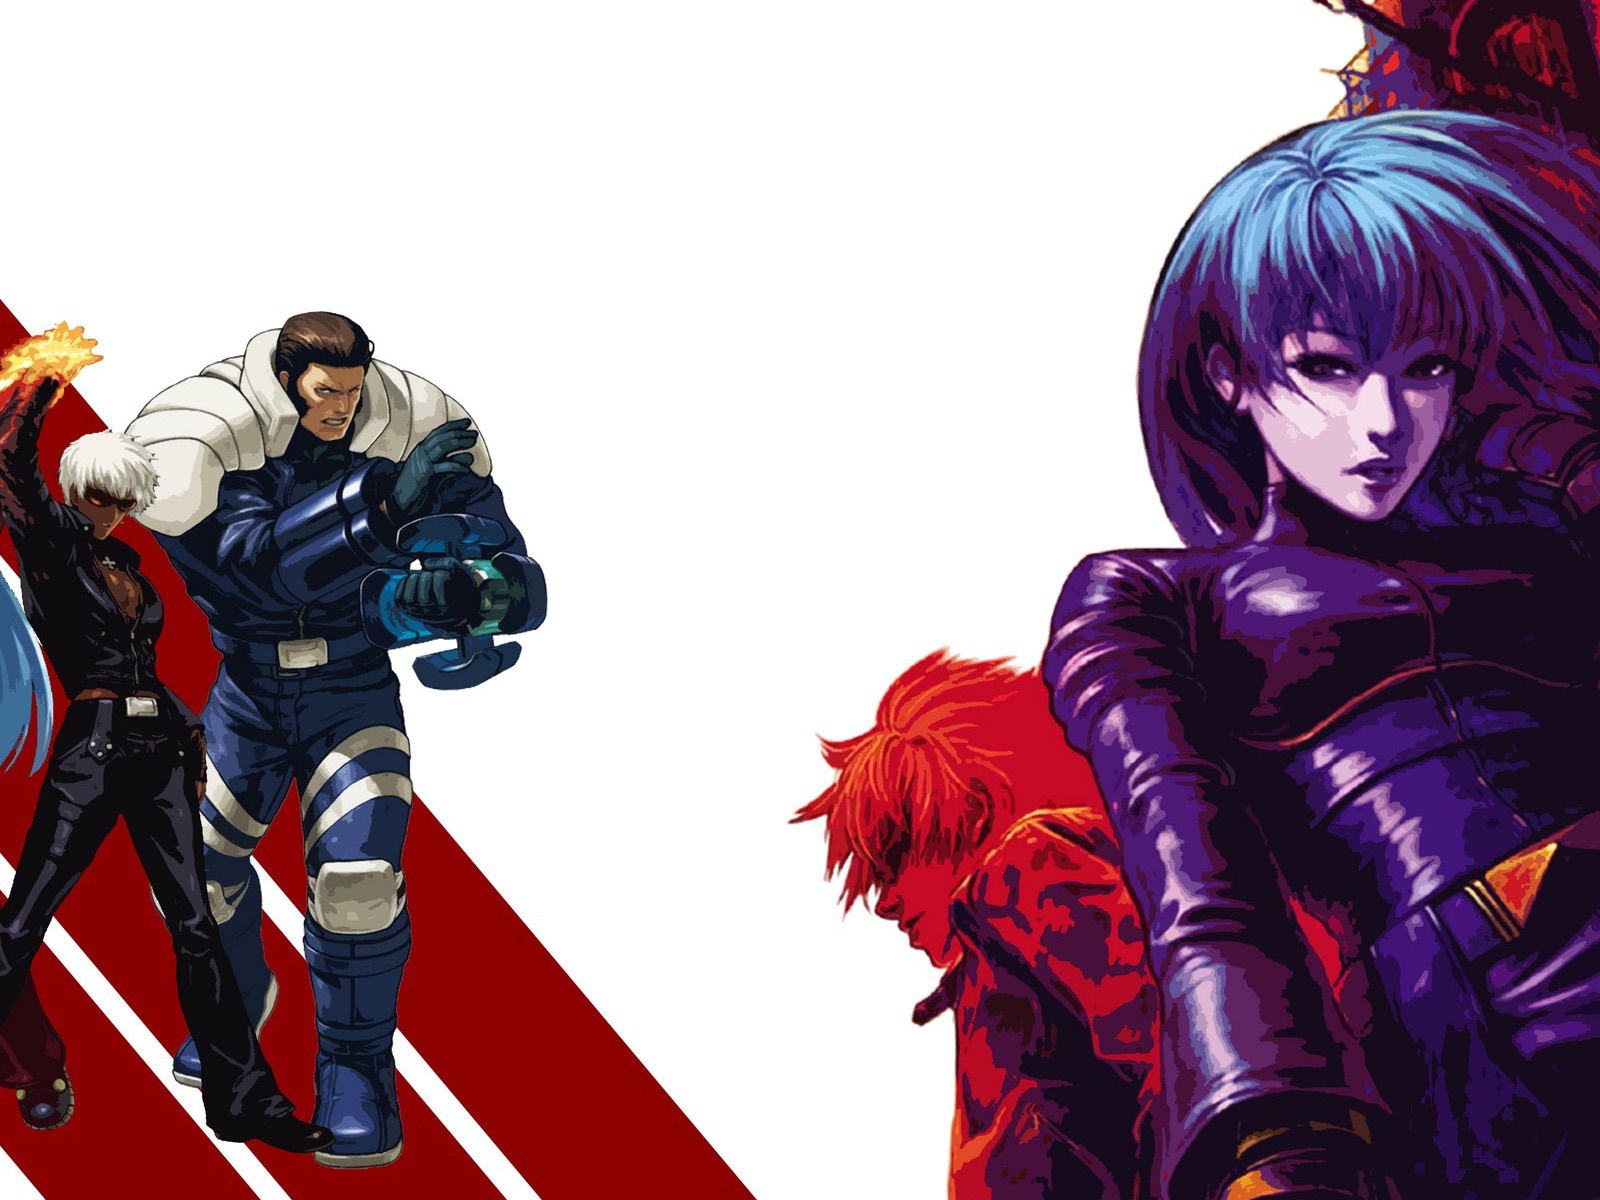 The King of Fighters XIII wallpapers #5 - 1600x1200